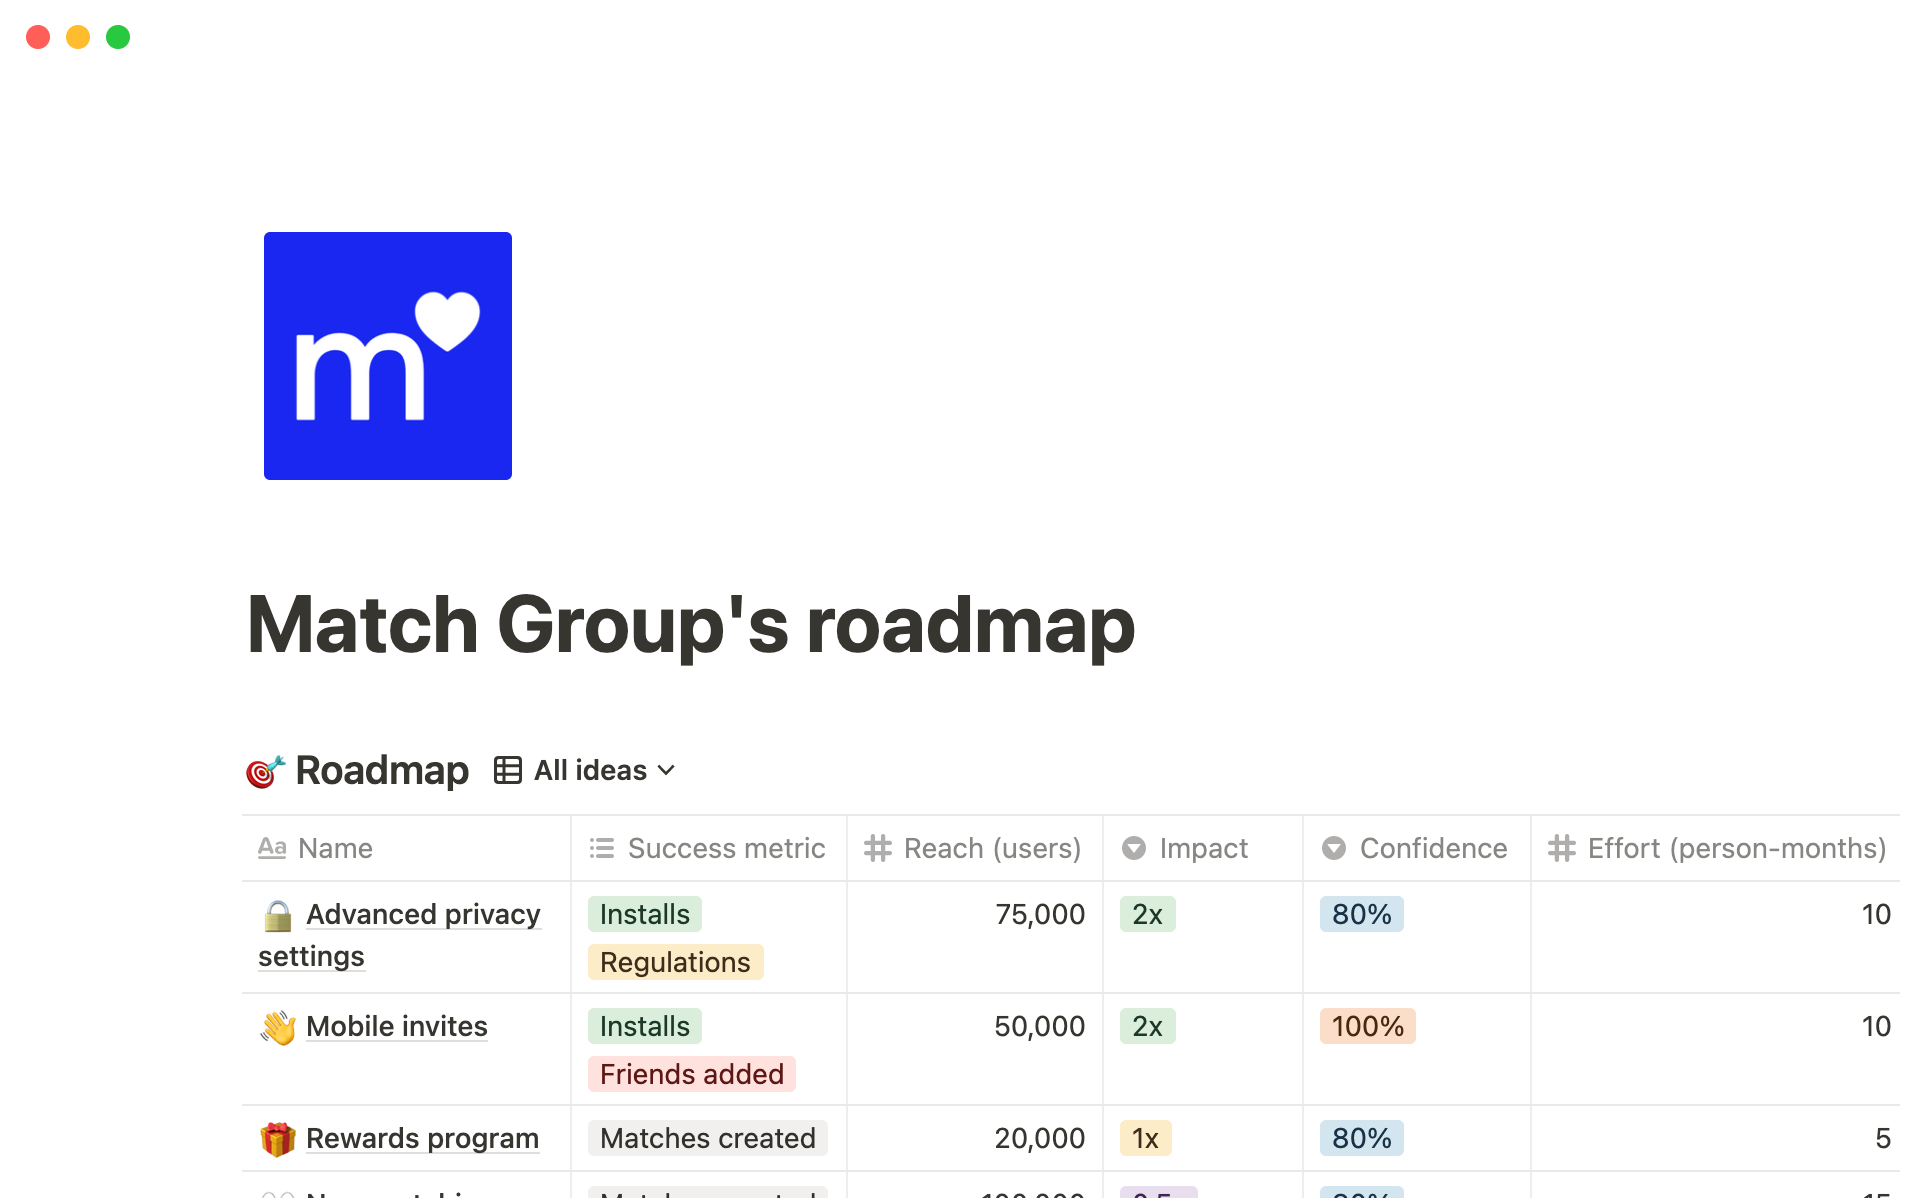 The desktop image for the Match Group's roadmap template